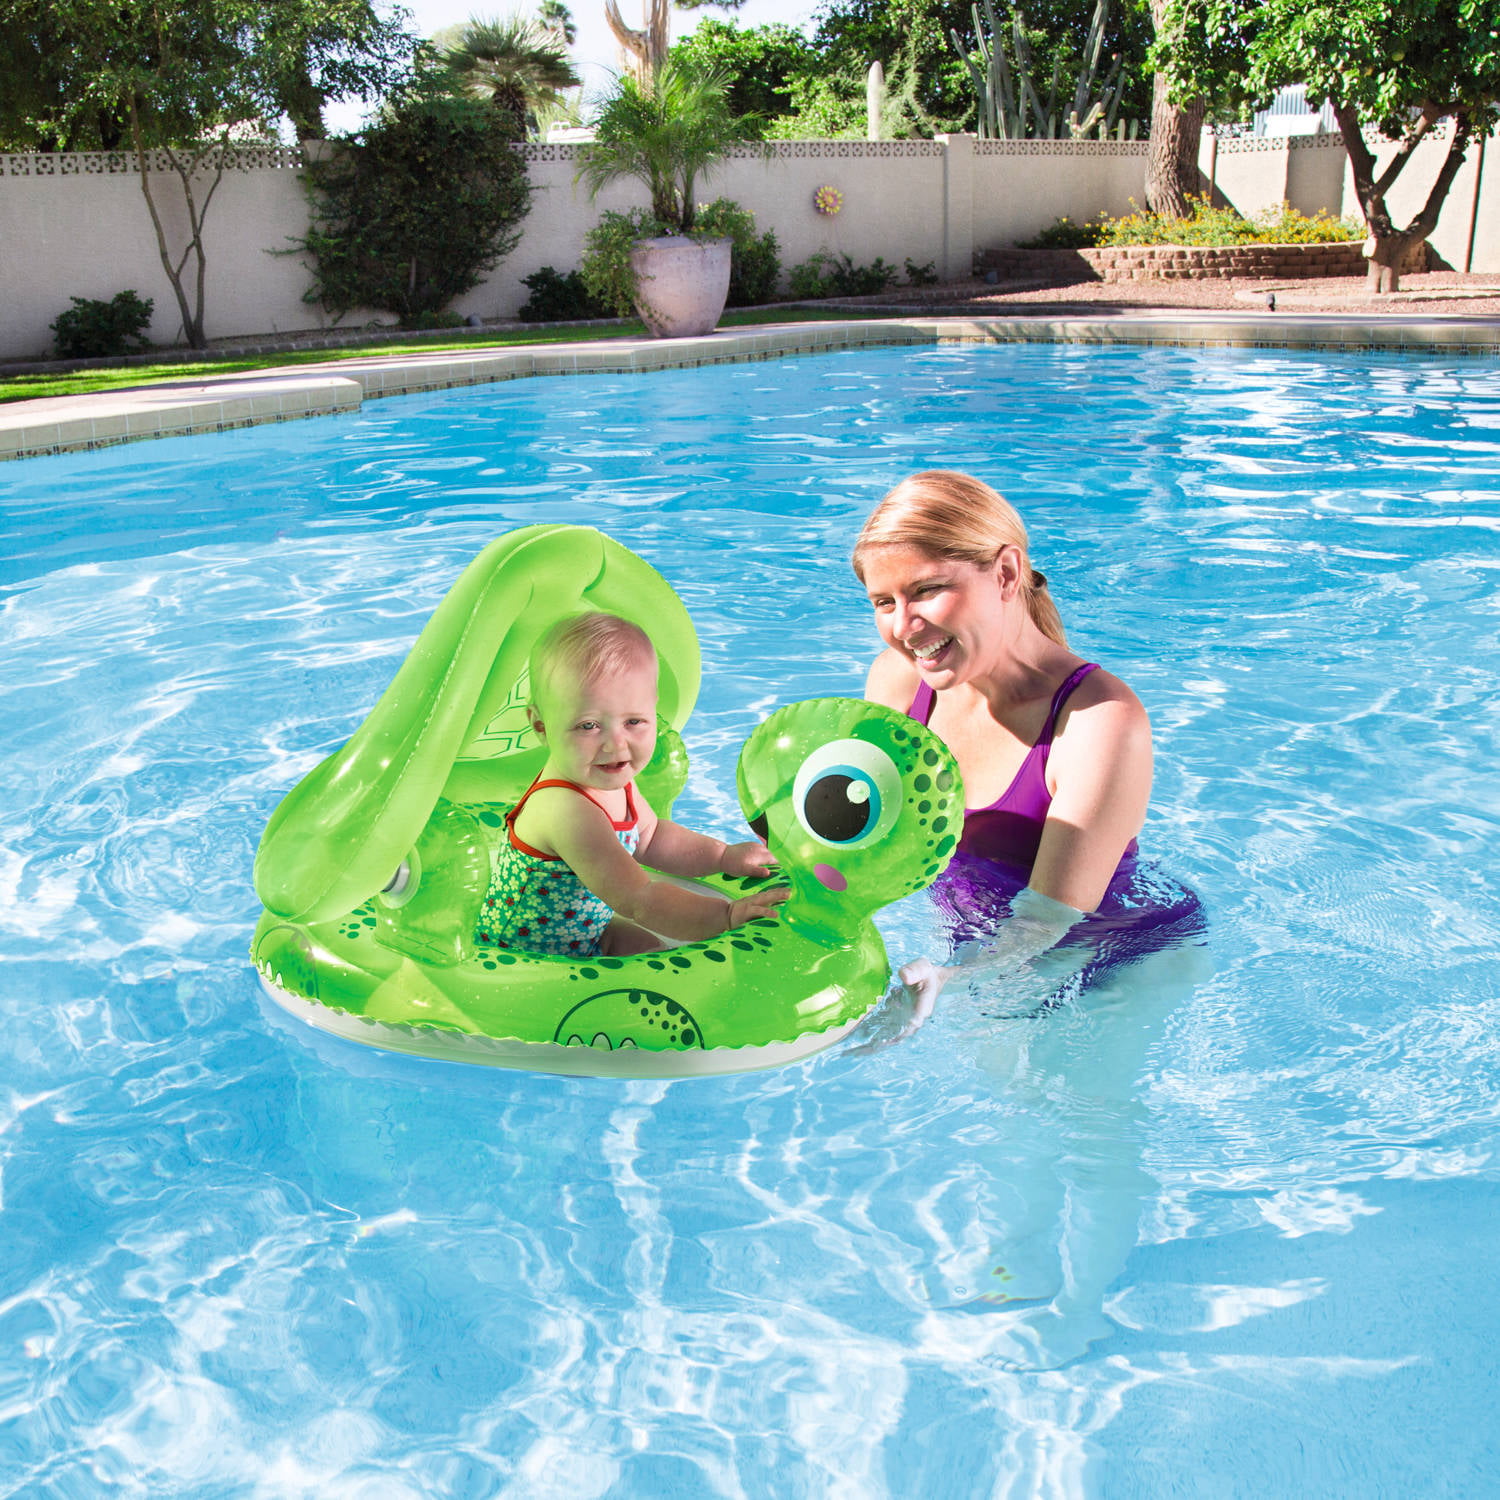 NEW Inflatable Turtle Baby Pool Partial Sunshade Water Sprayer Infant Child